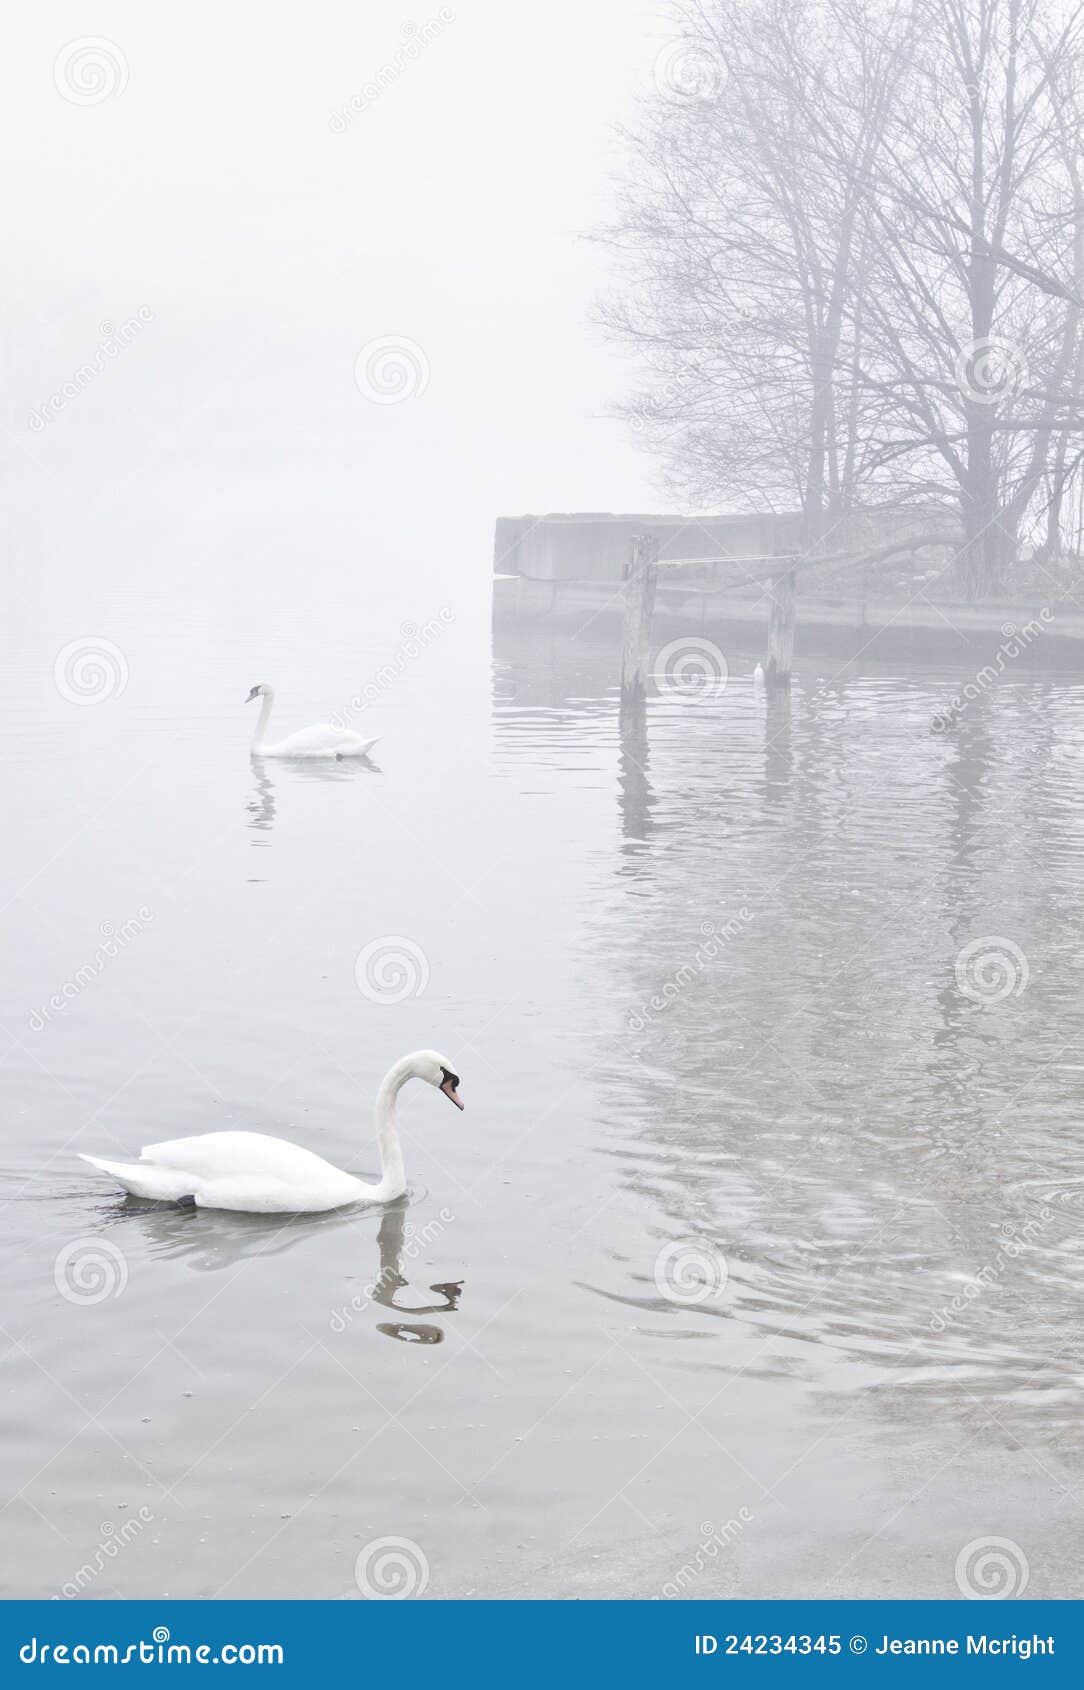 Swans on Misty Lake Near Pier Stock Image - Image of surface, trees ...